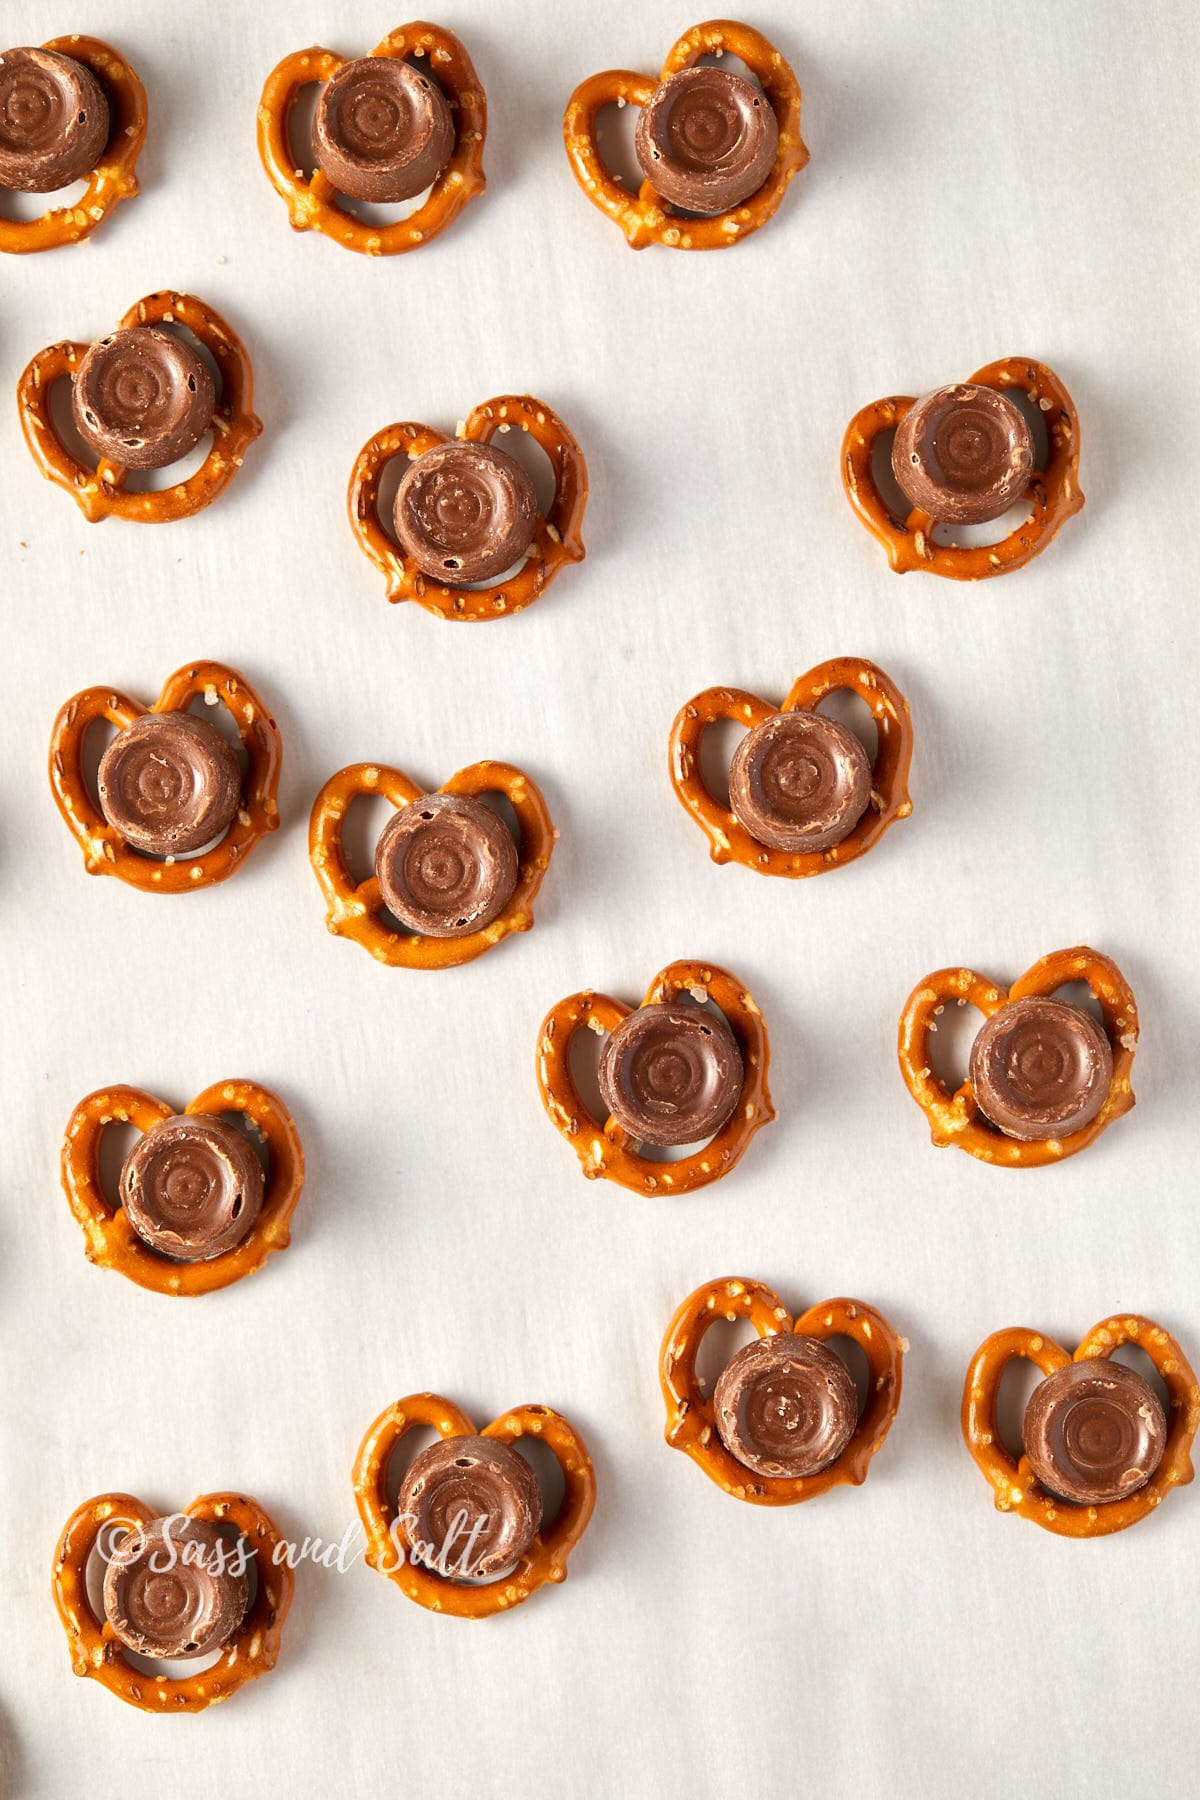 Overhead view of pretzels with Rolos on top of pretzels.